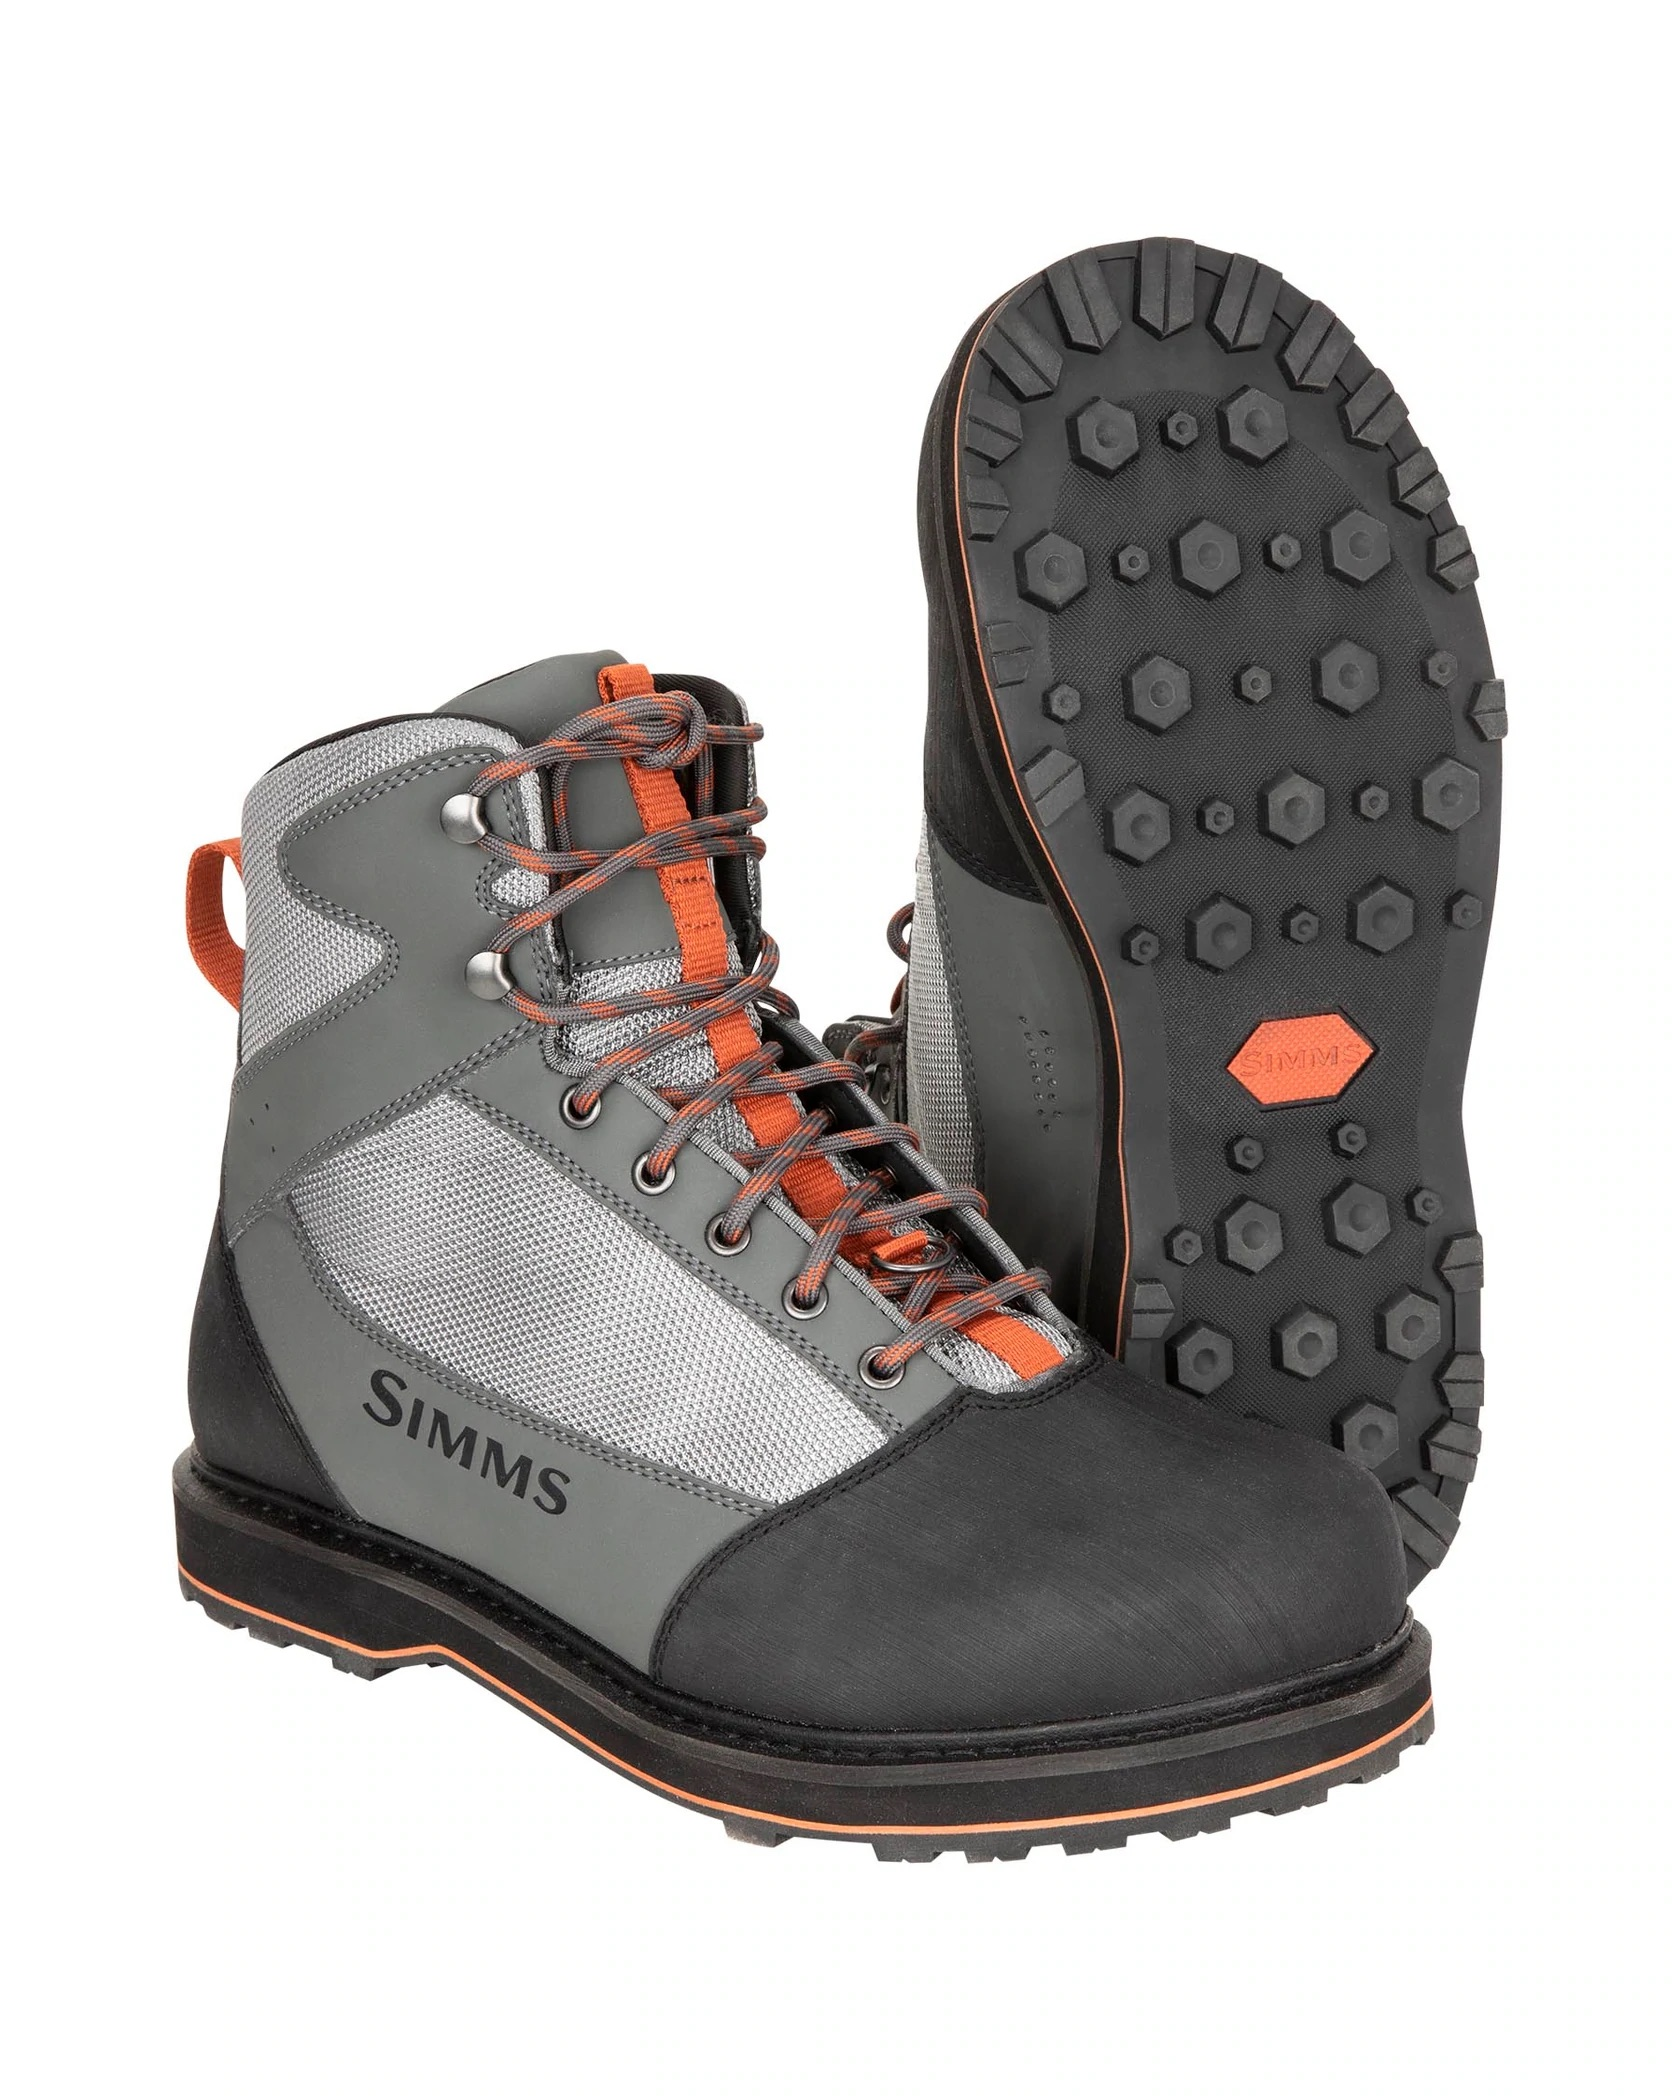 Simms Tributary Boot - Rubber - Size 5